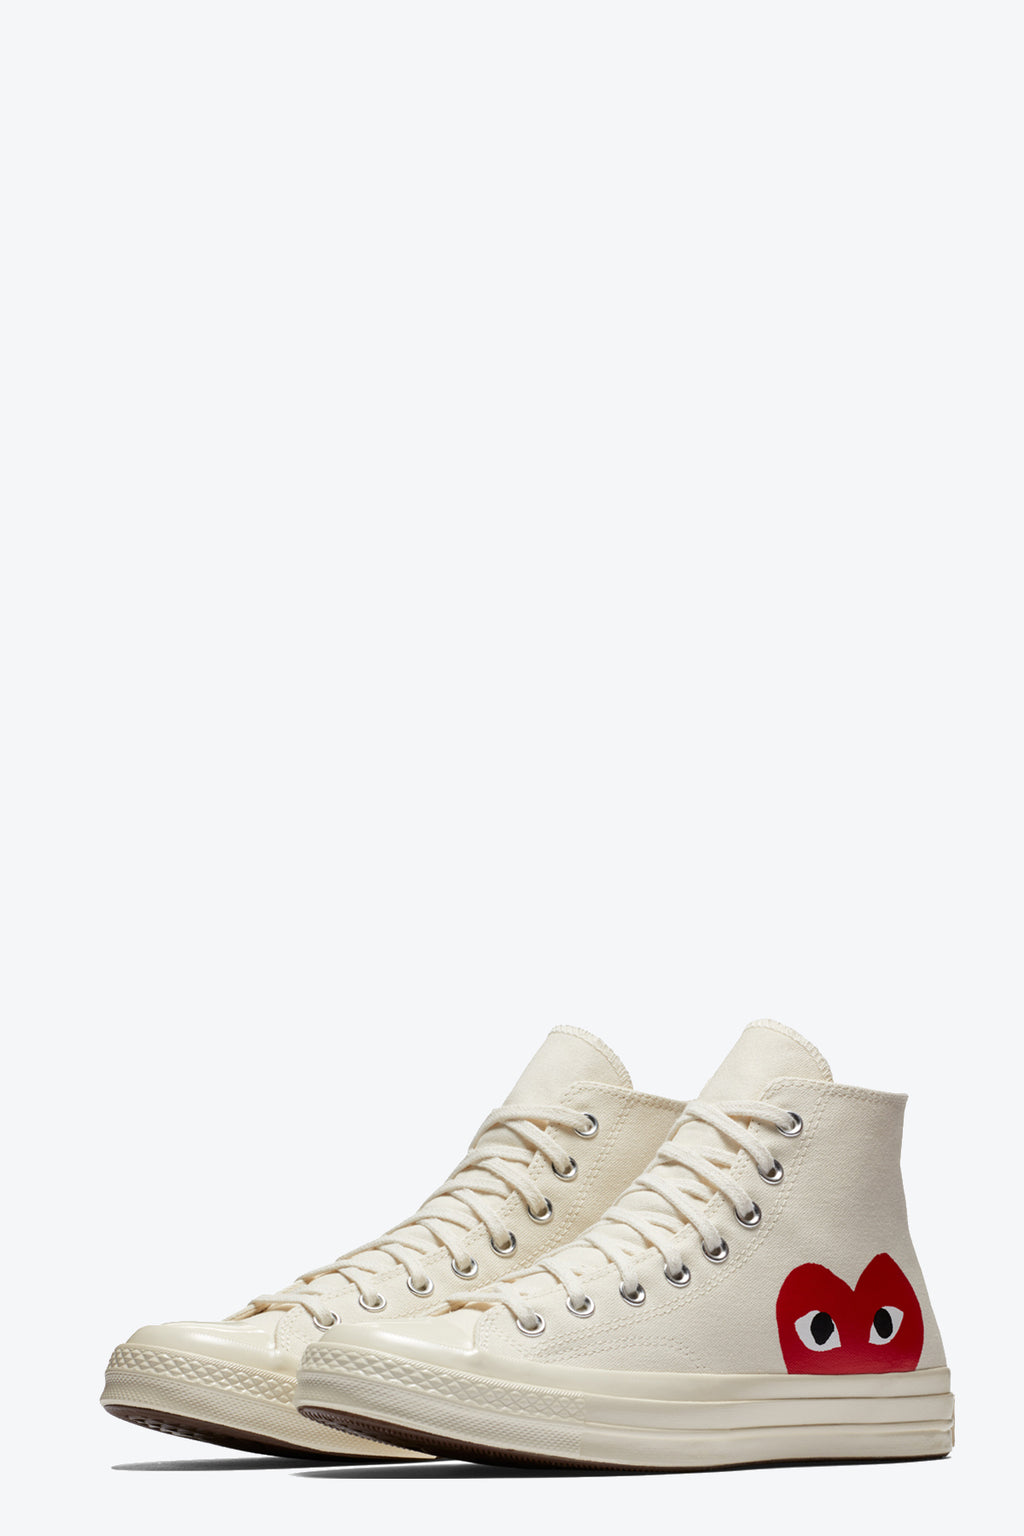 alt-image__Converse-collaboration-Chuck-Taylor-70's-off-white-canvas-high-sneaker.